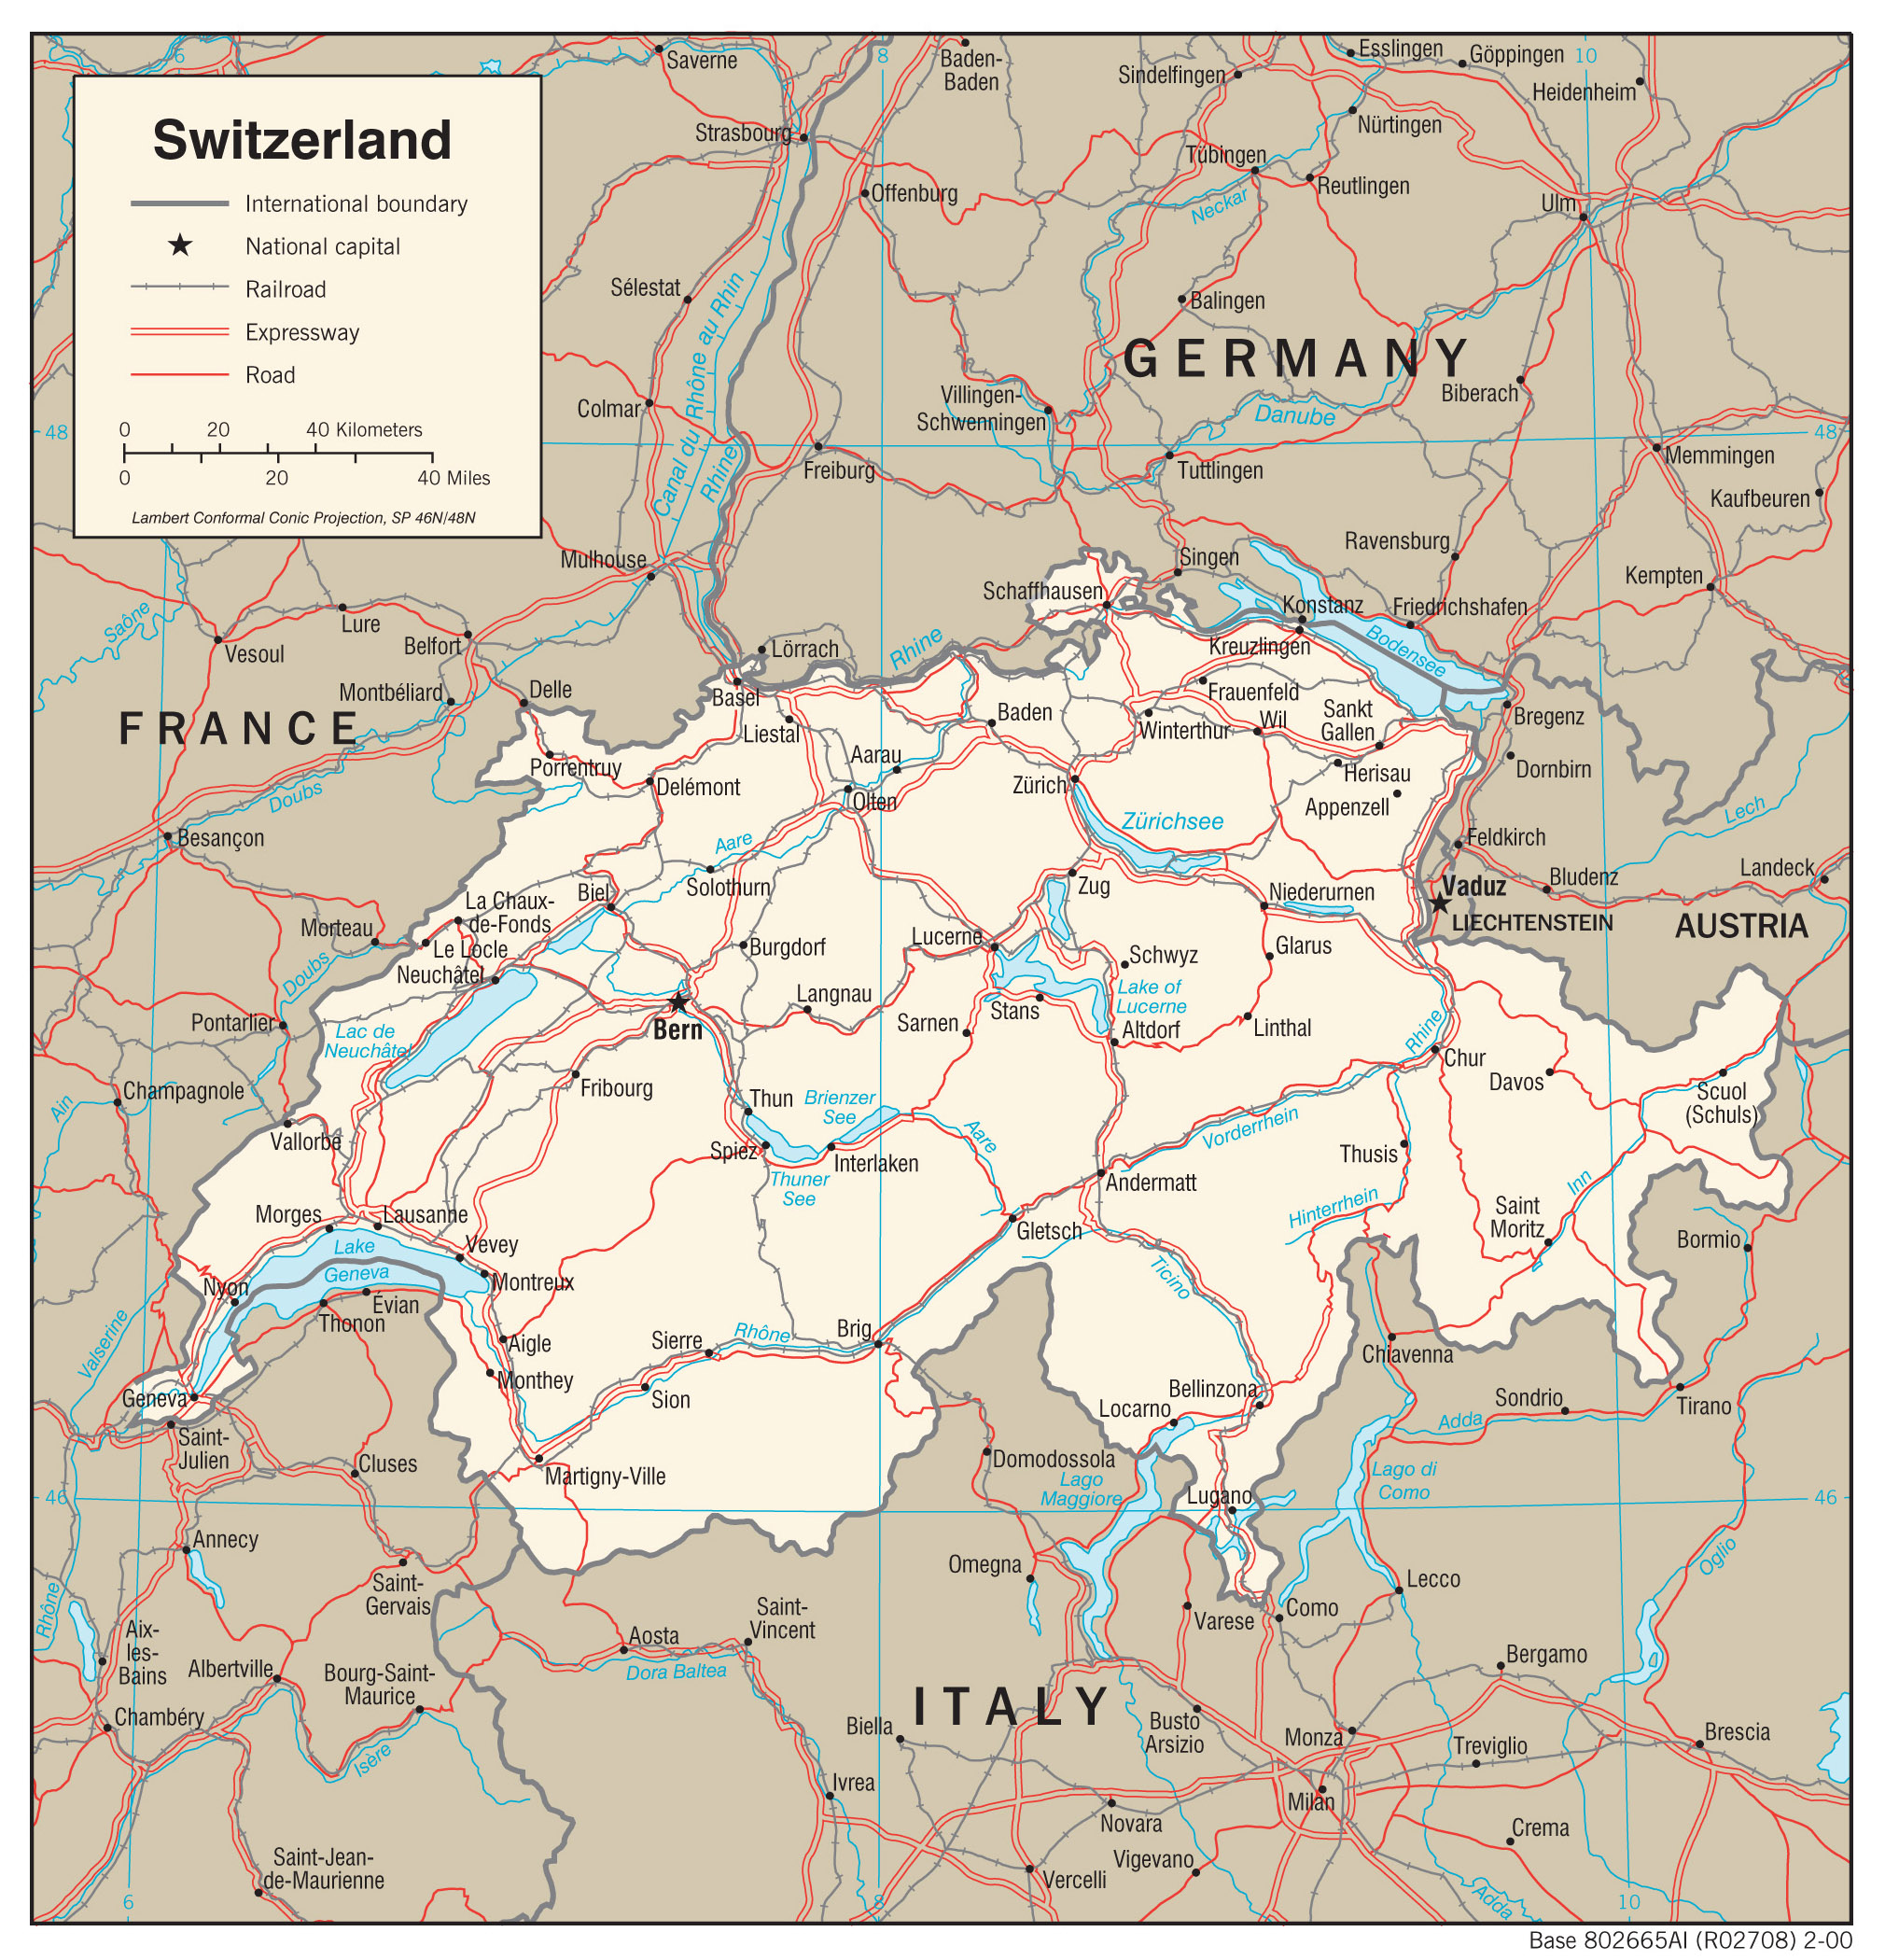 maps-of-switzerland-detailed-map-of-switzerland-in-english-tourist-map-of-switzerland-road